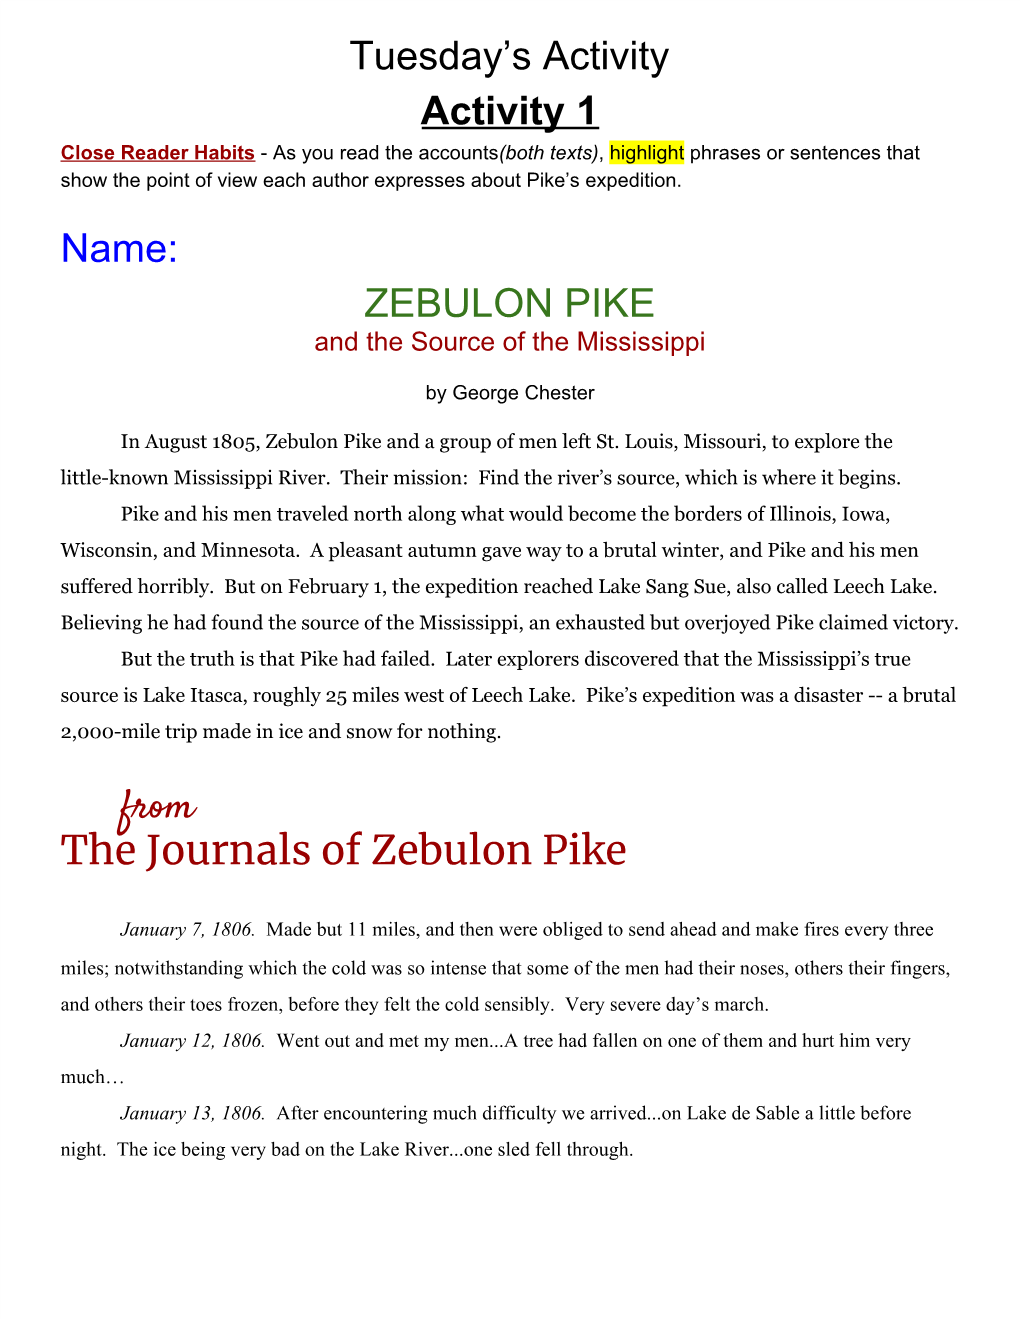 ZEBULON PIKE from the Journals of Zebulon Pike